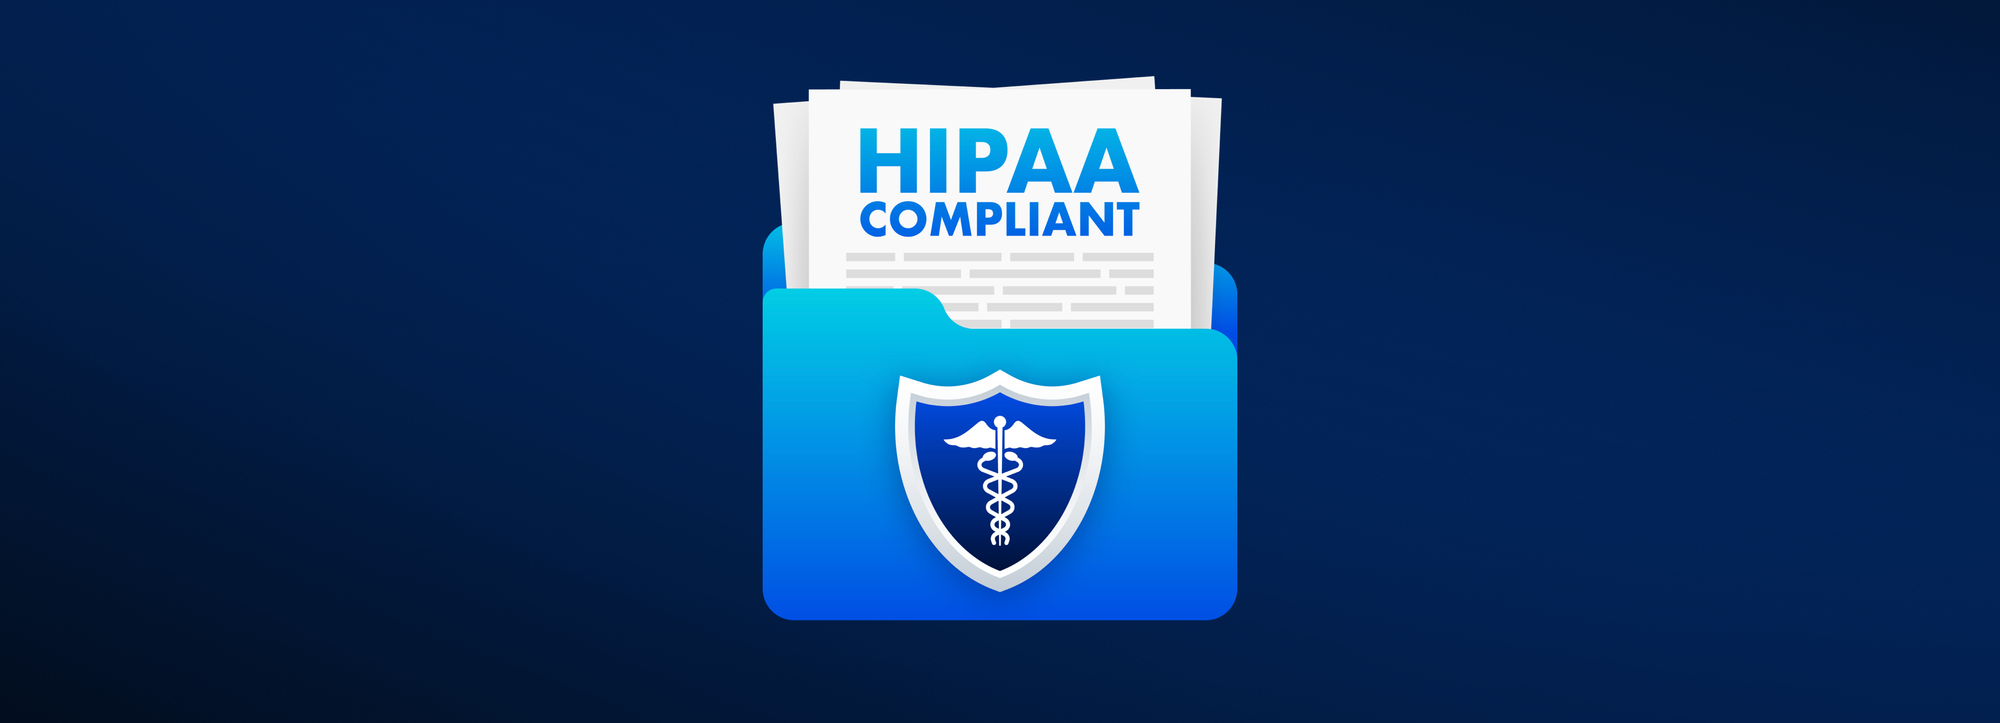 HIPAA minimum necessary standard: what it means and how to play by the rules